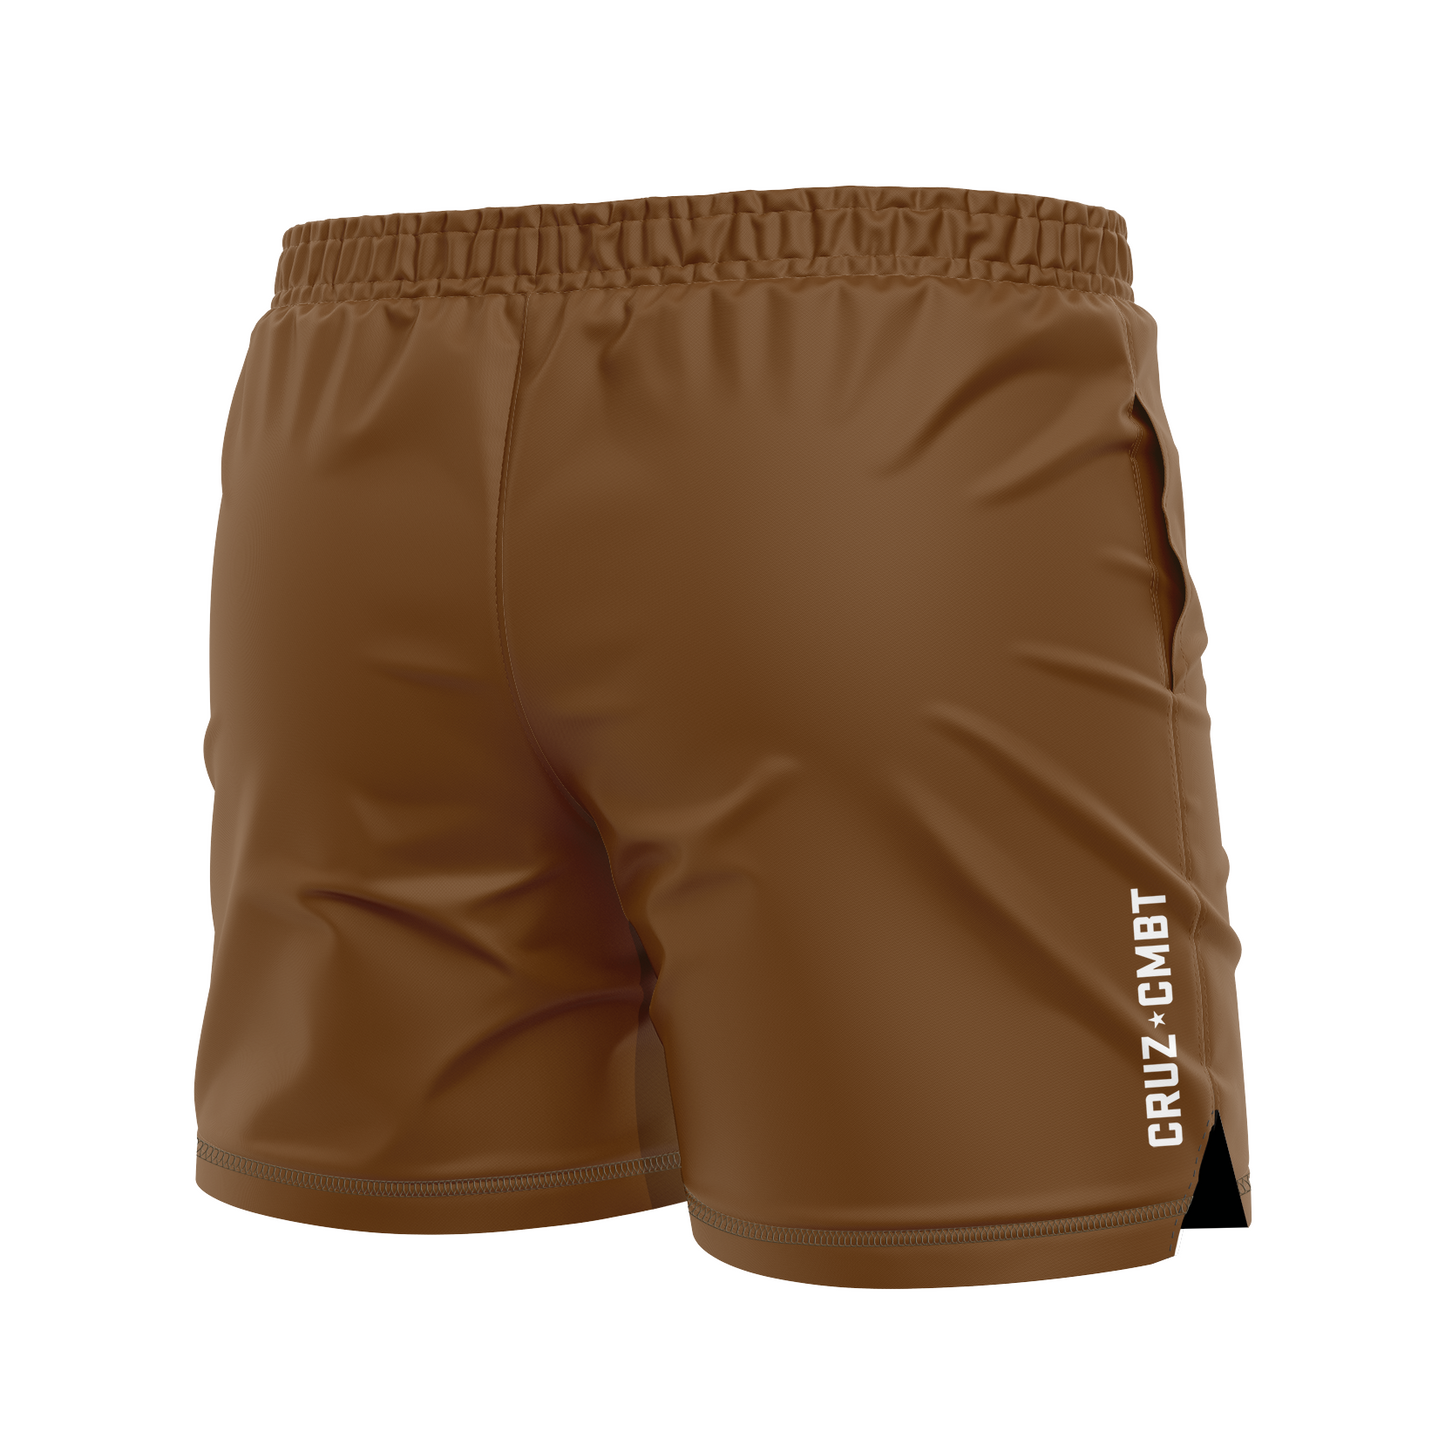 Base Collection men's FC shorts, brown